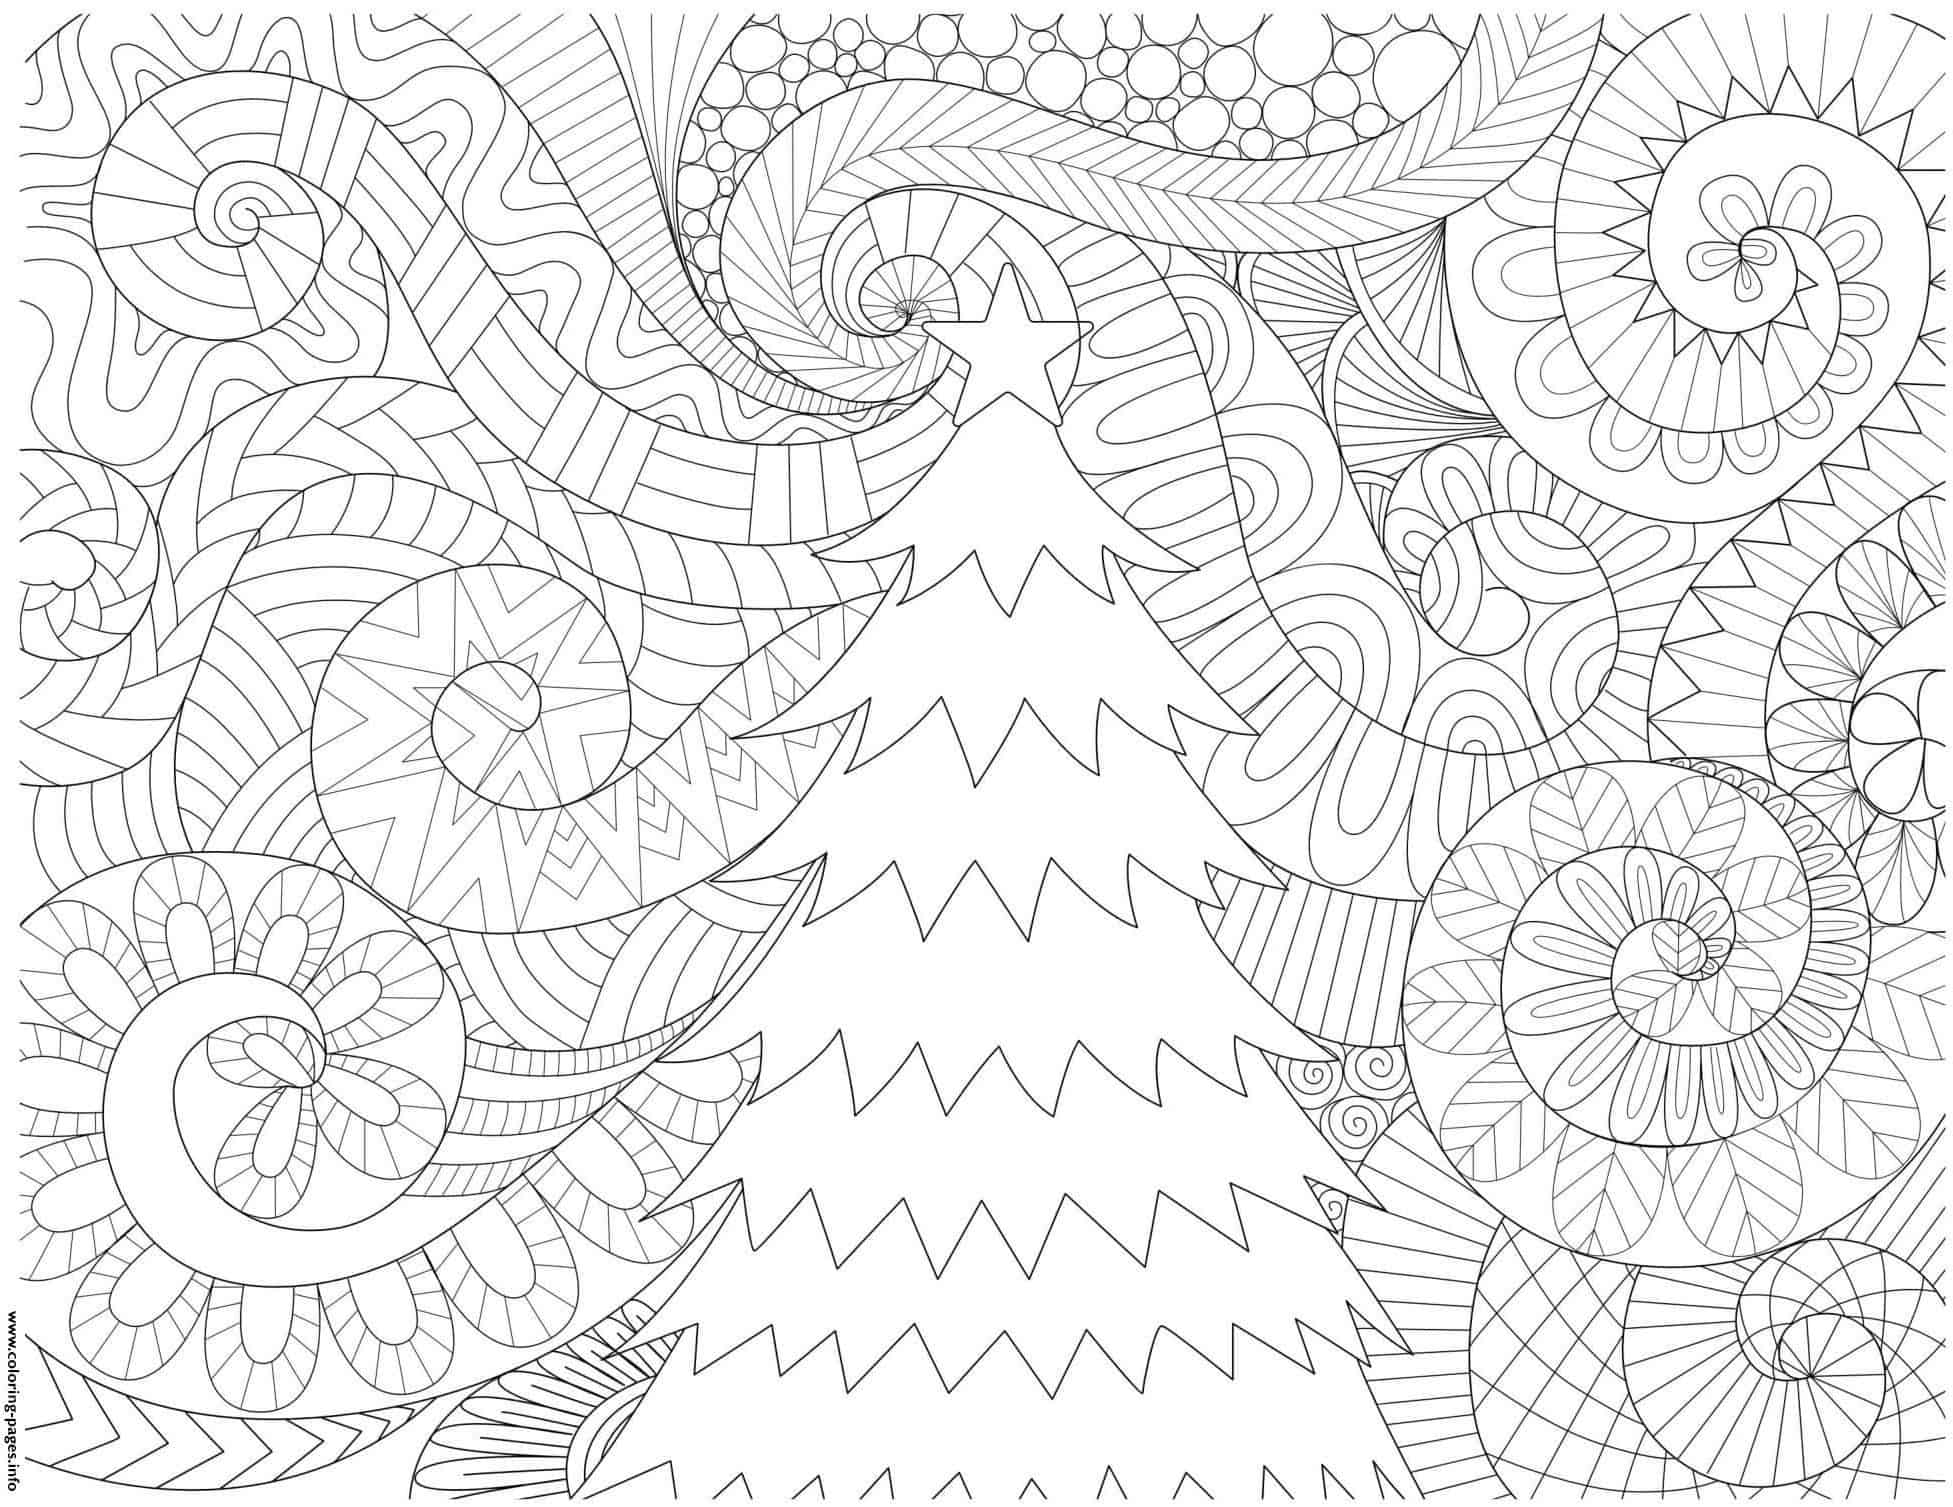 winter scene coloring pages for adults